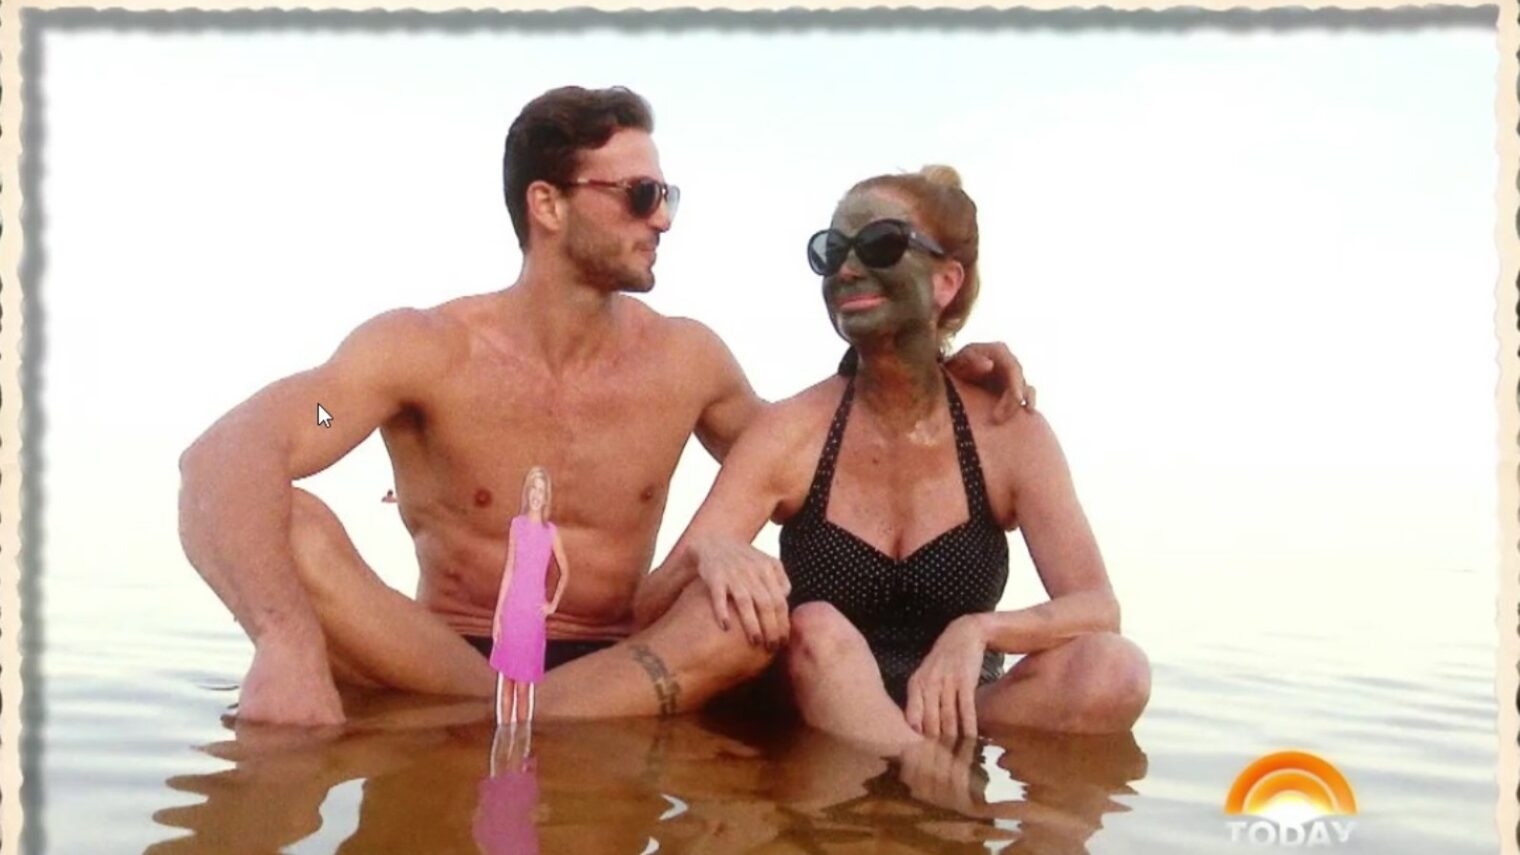 Today show’s Kathie Lee Gifford in the Dead Sea with Israeli model and actor Michael Lewis (and a cutout of her co-host, Hoda Kotb). Photo: screenshot